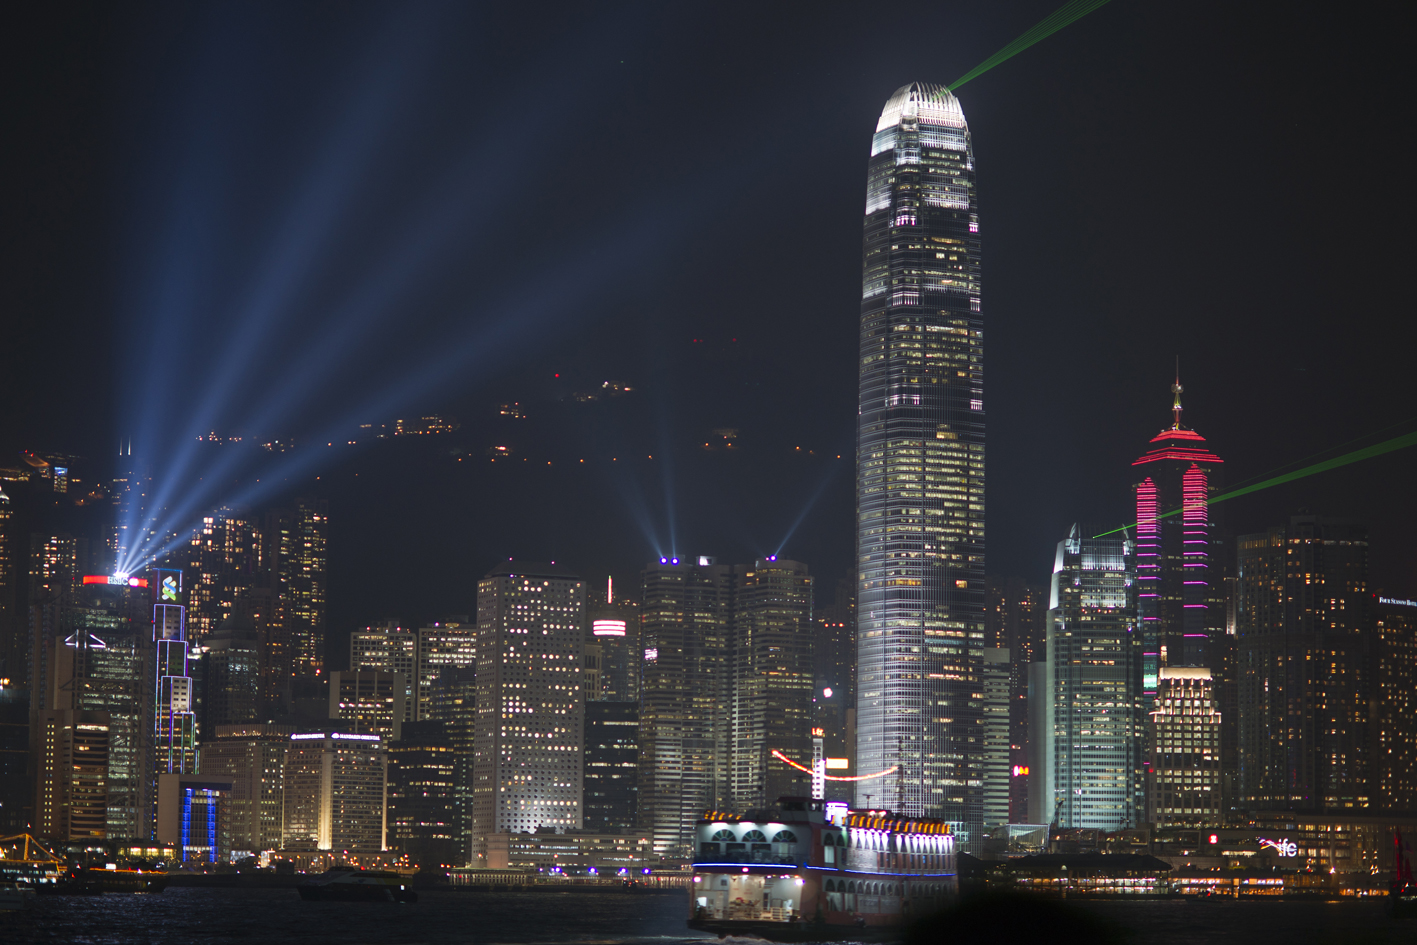 Hong Kong to “Explore the Application of Blockchain Technology in the Financial Services Industry”